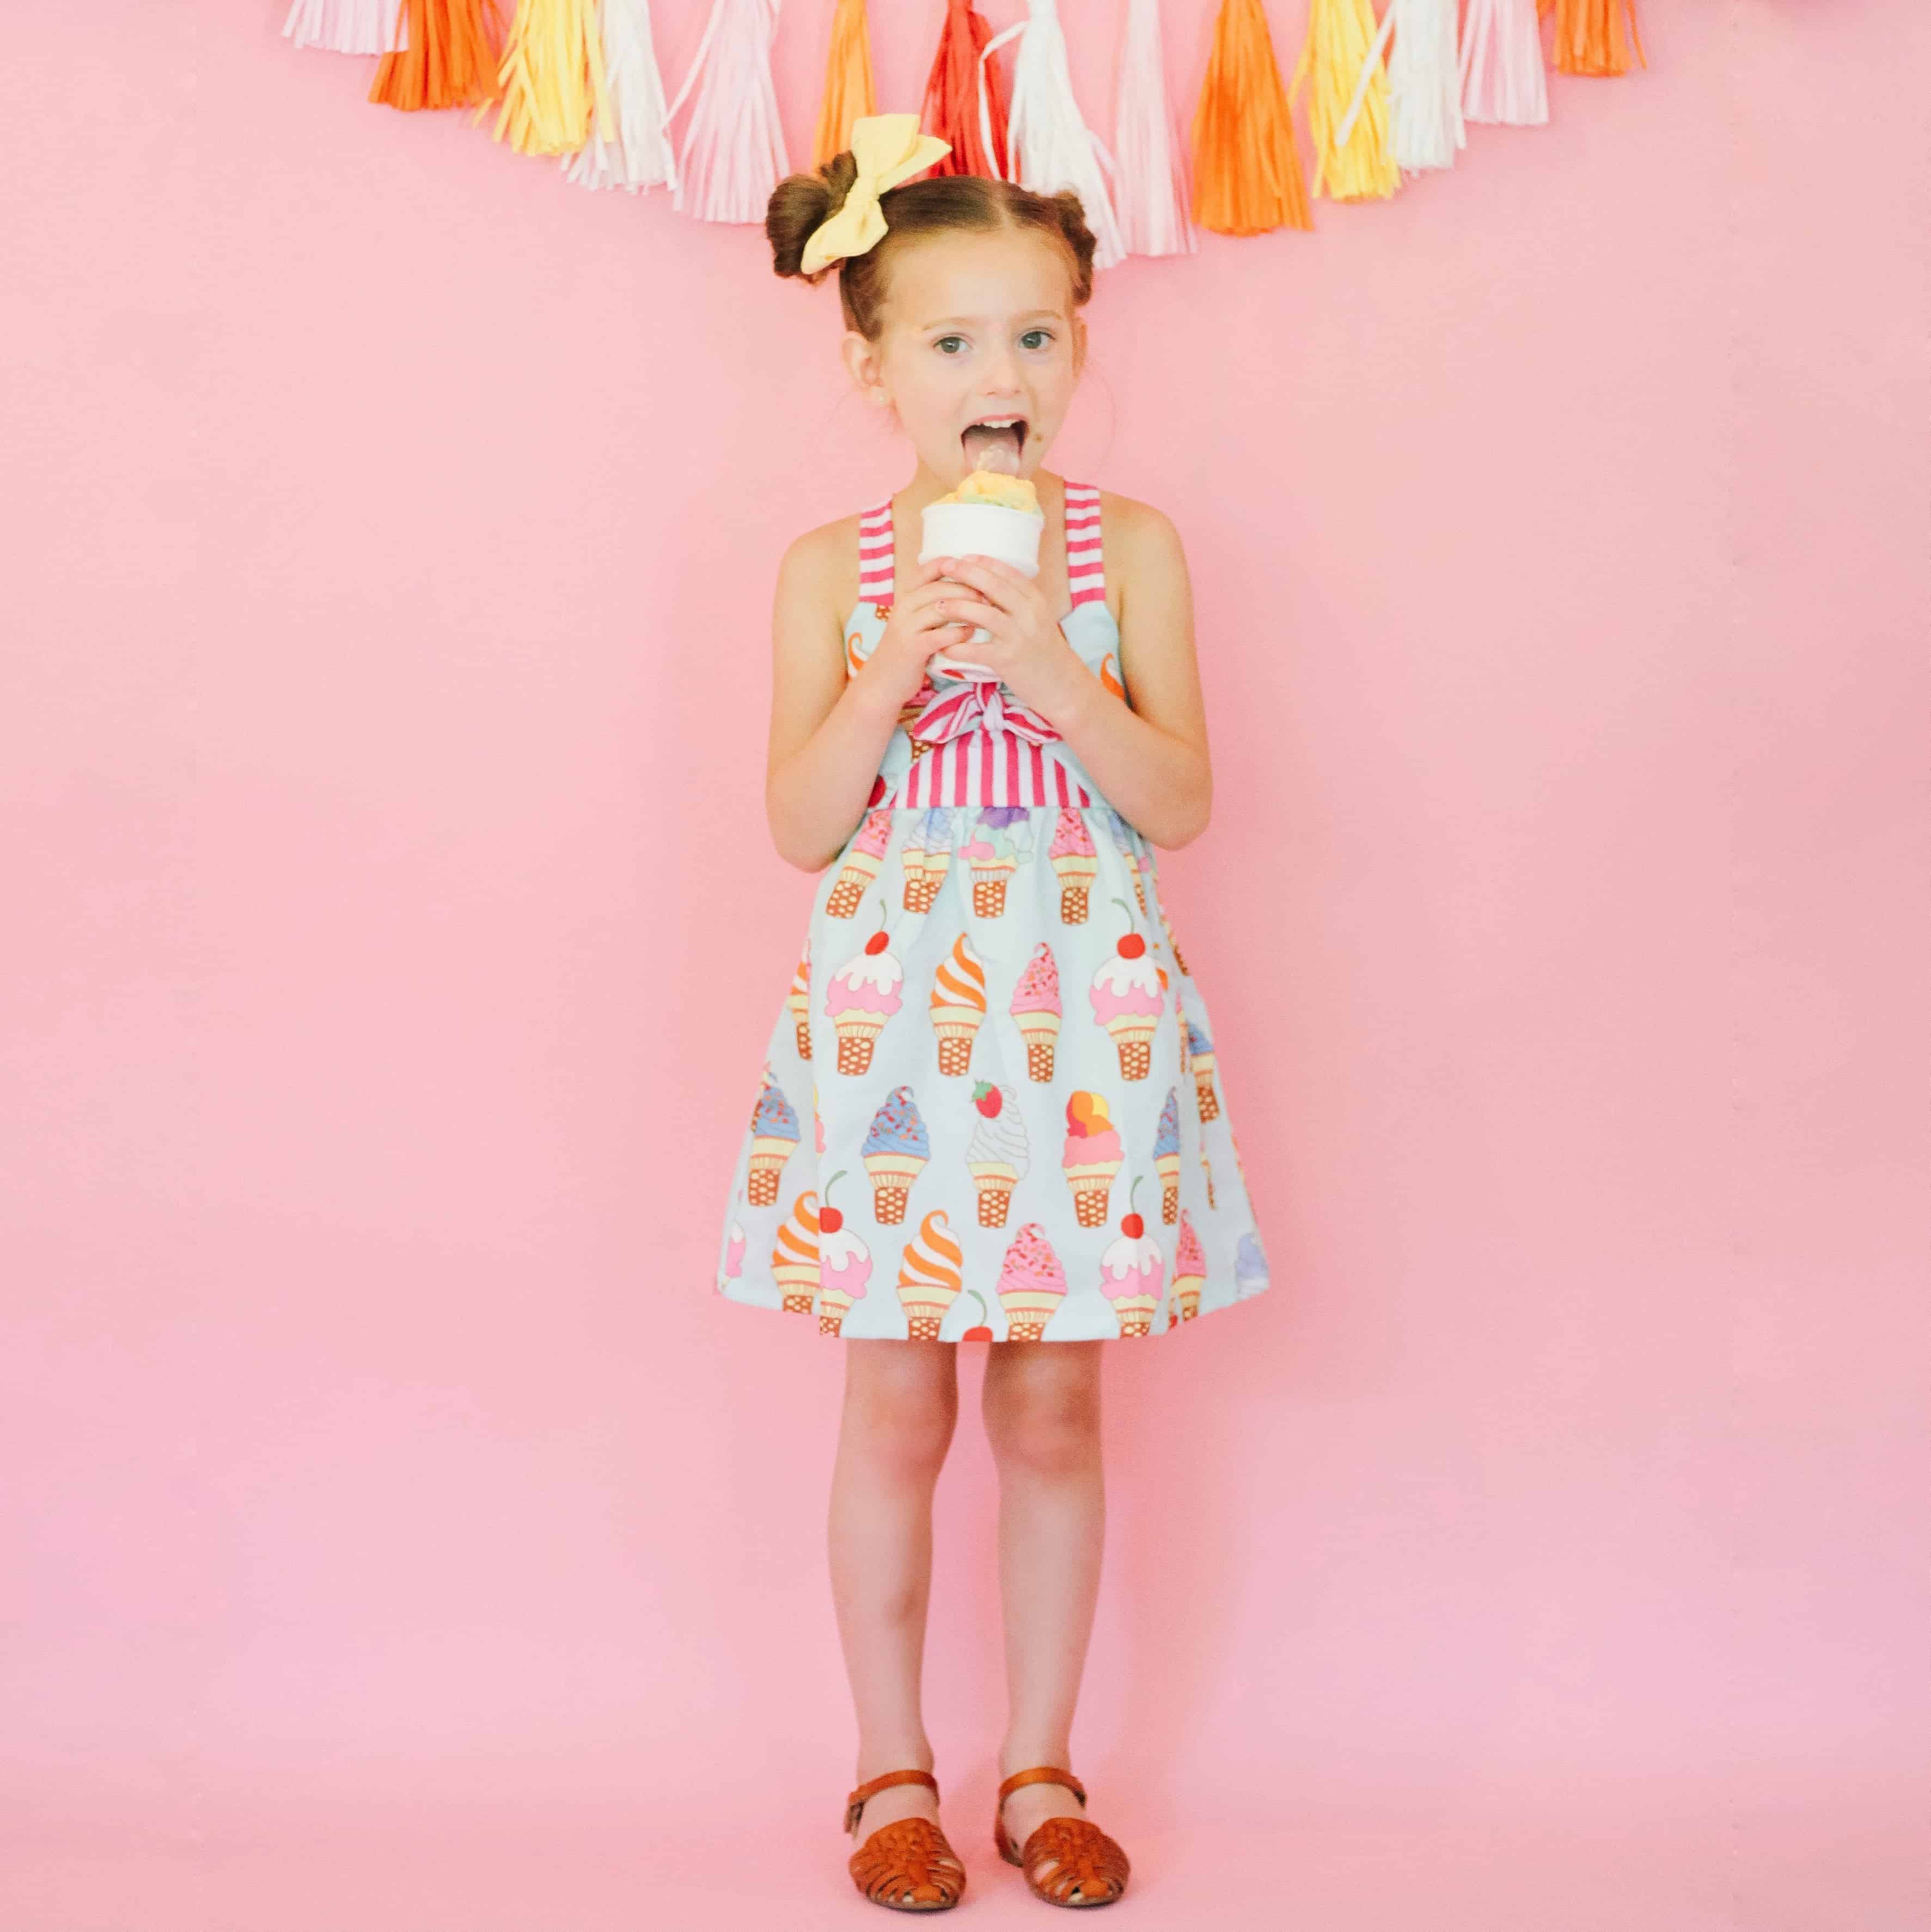 Little girl in ice cream dress against pink wall